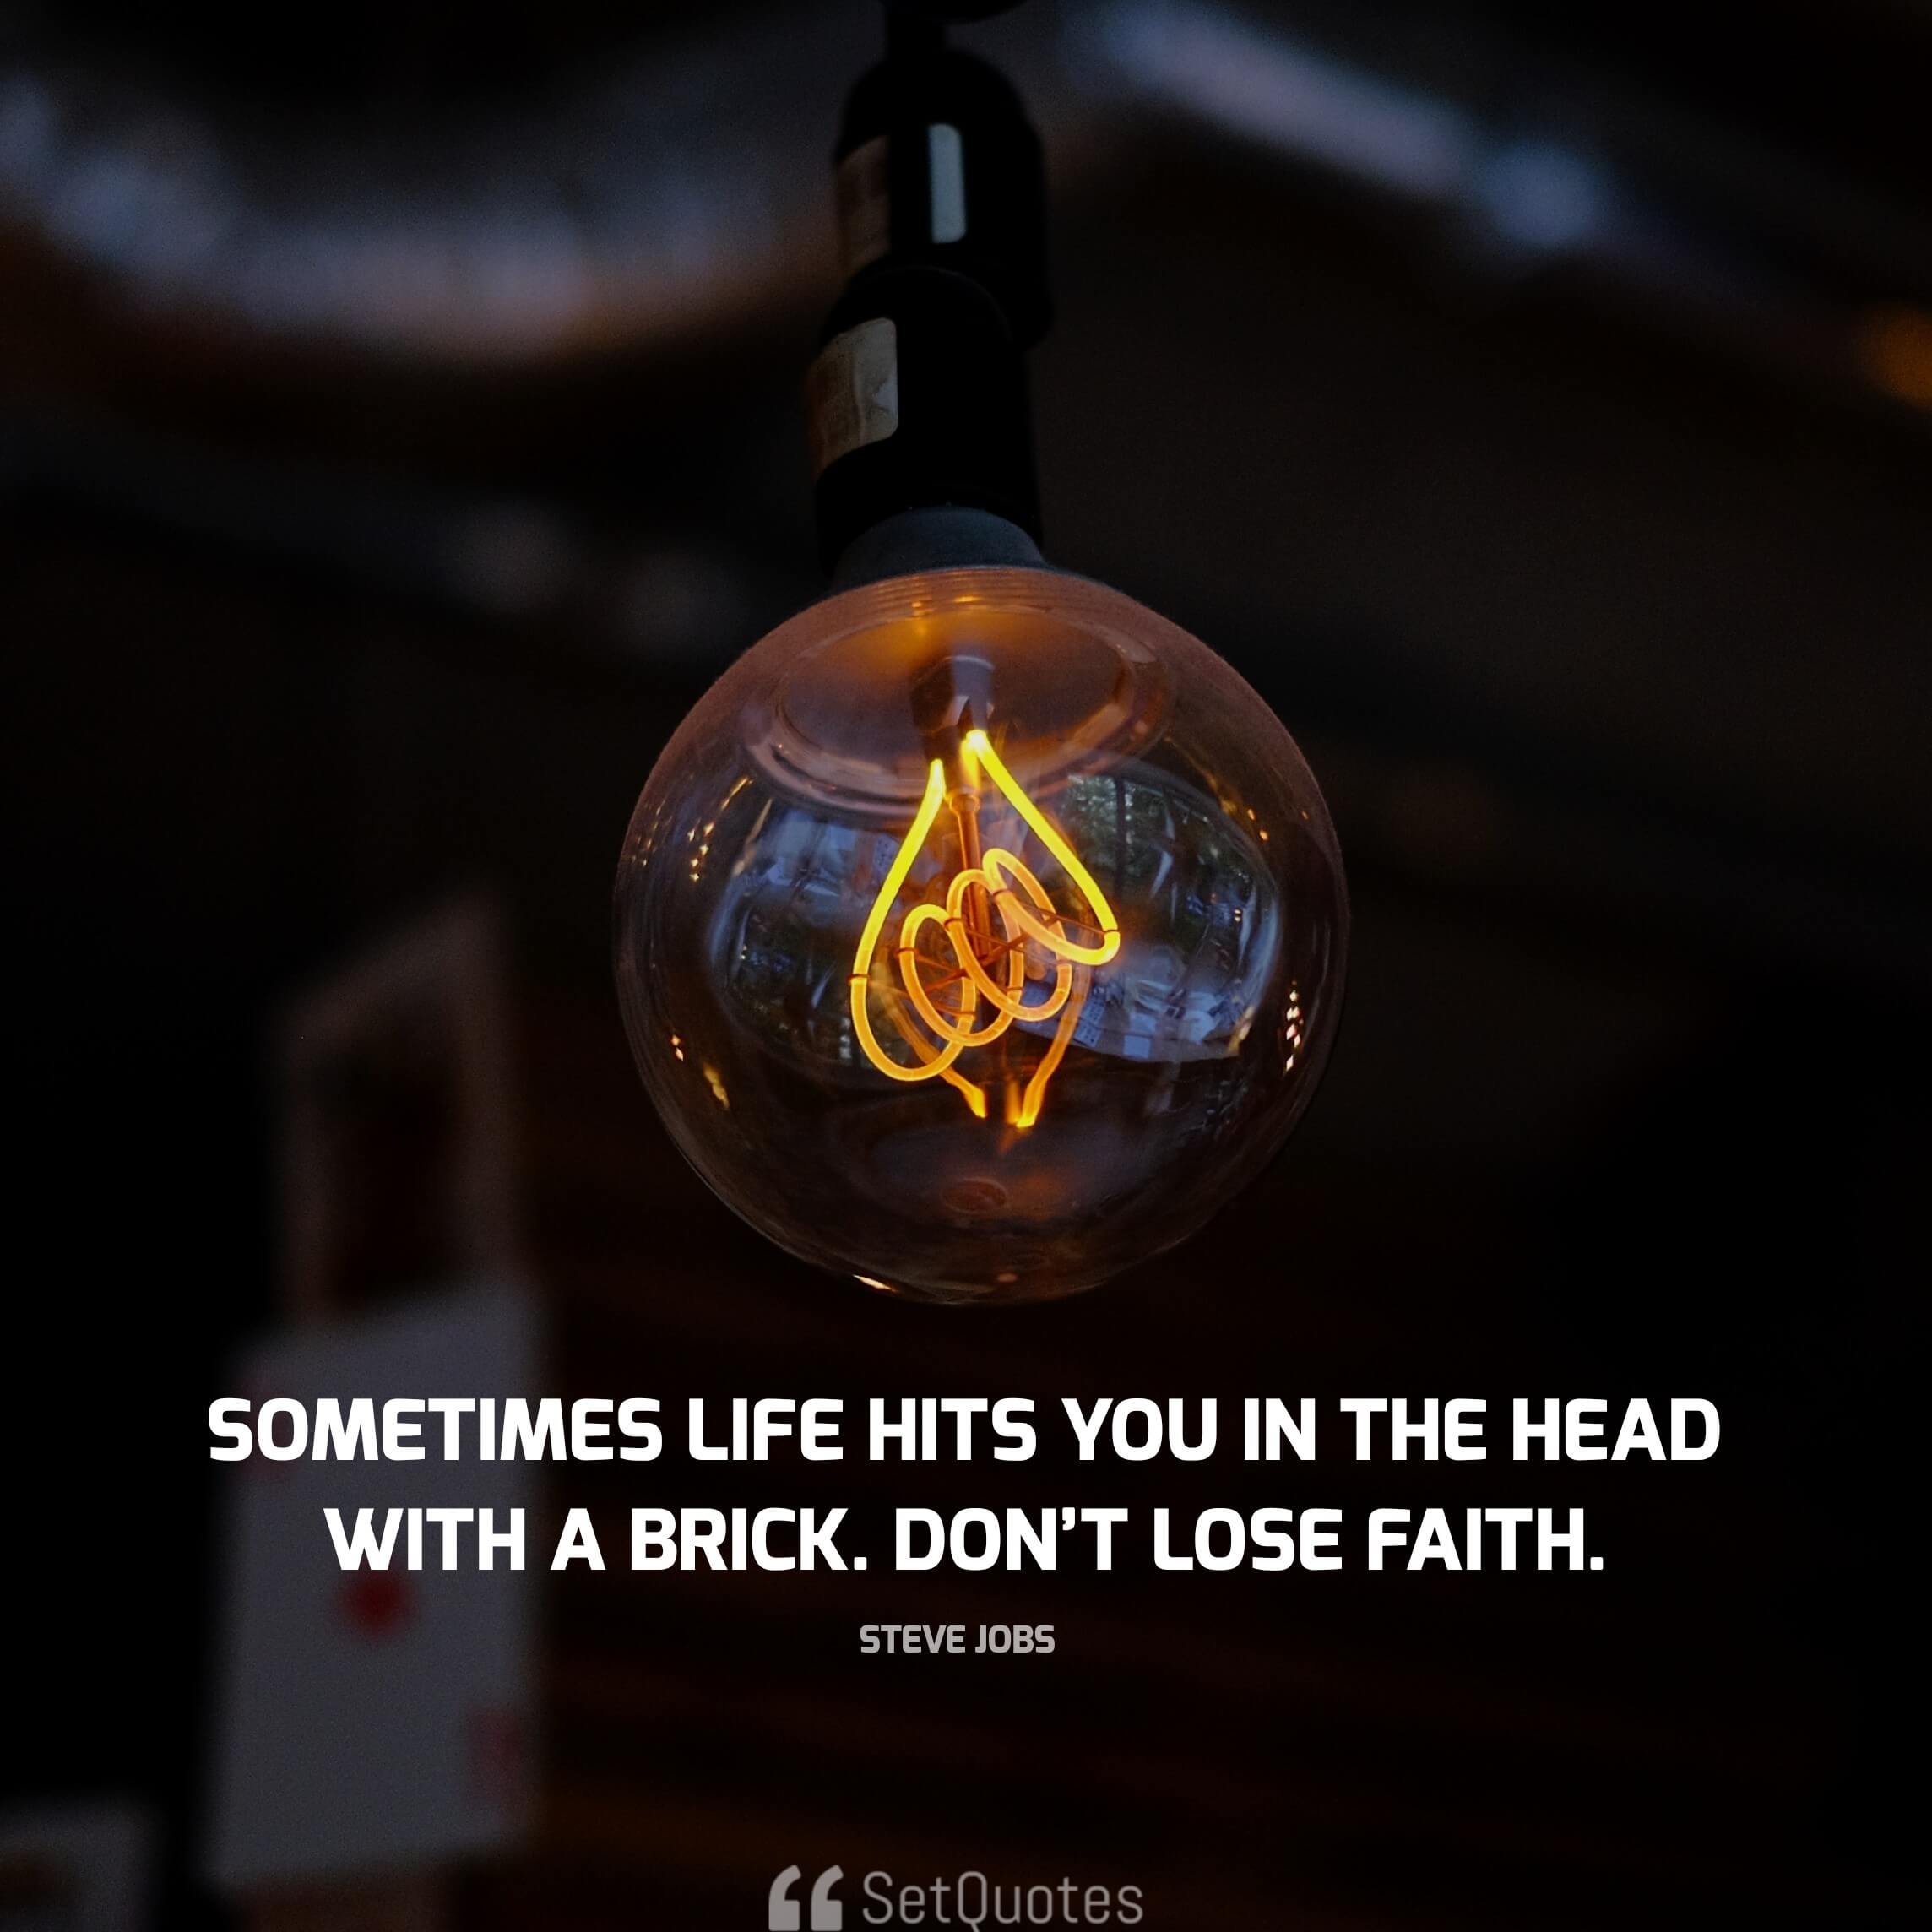 Sometimes life hits you in the head with a brick. Don’t lose faith. - steve jobs quotes - Money Doesn't Buy Happiness quotes